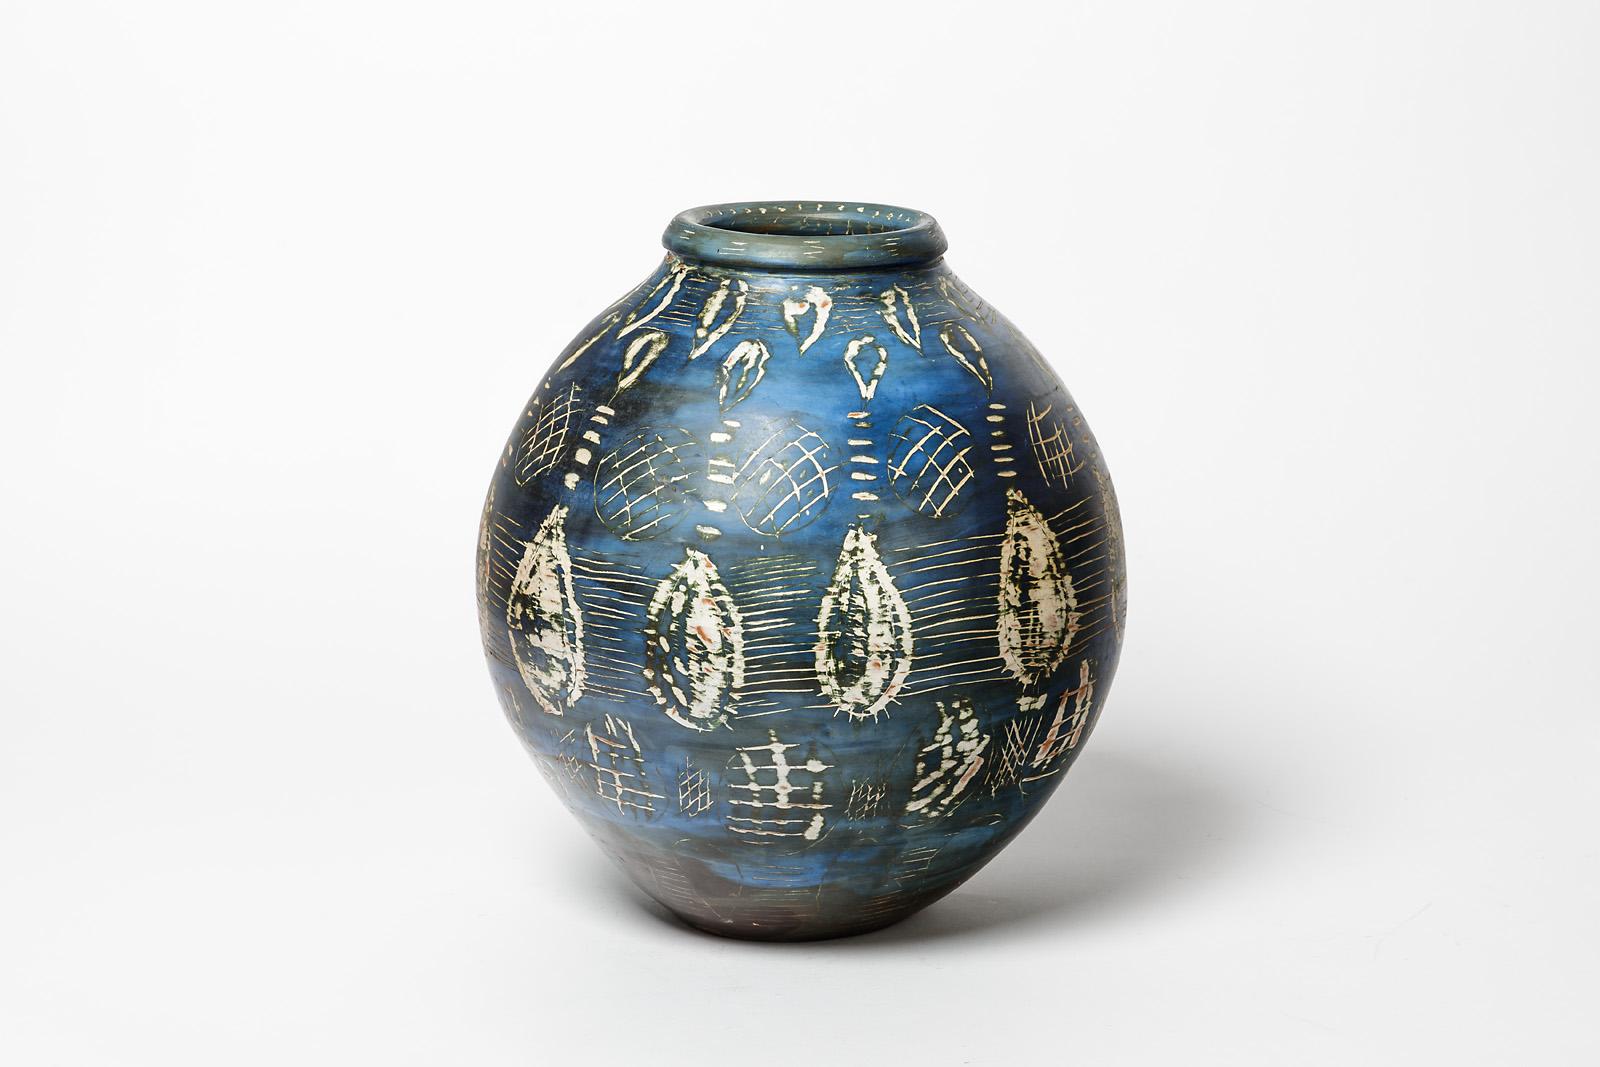 Beaux Arts Ceramic Vase with Abstract Decoration, circa 1980-1990, by Sophie Combres